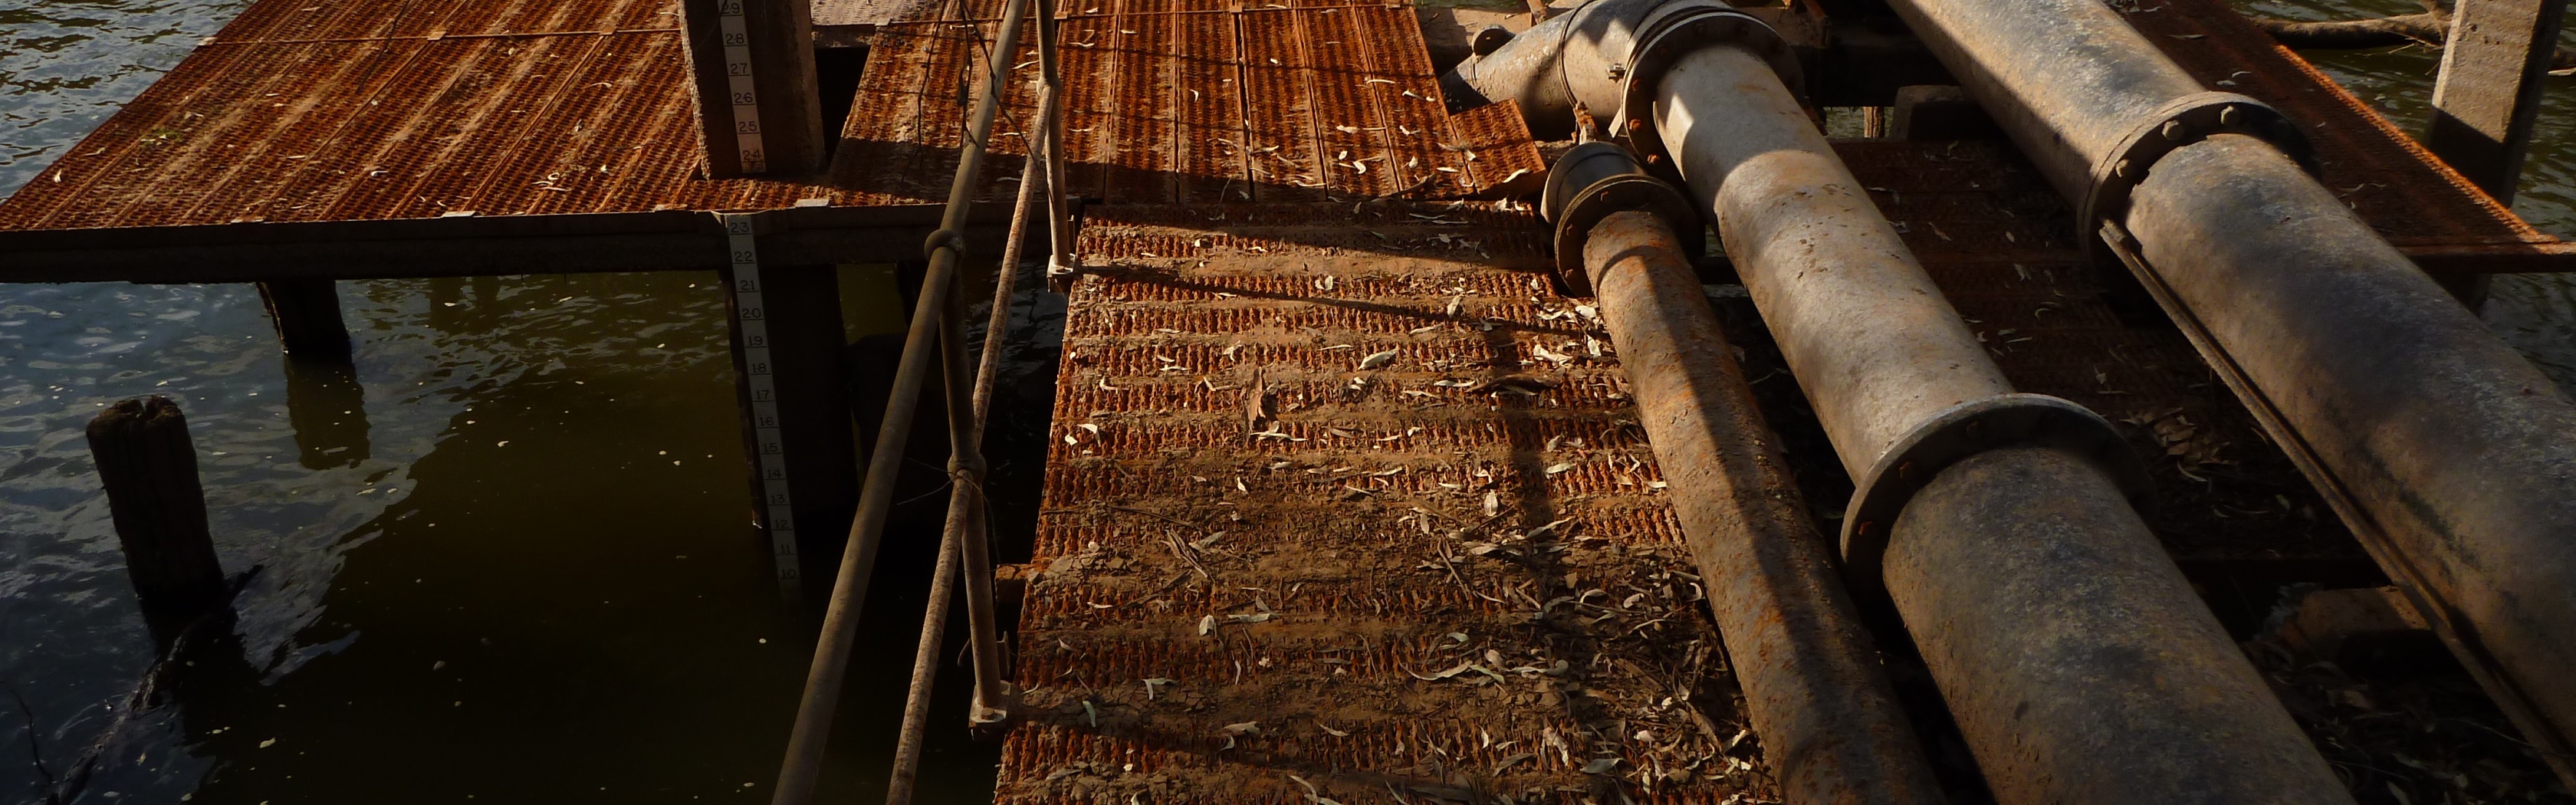 Lovely Linux dual screen wallpaper Rusty platform and water pipes